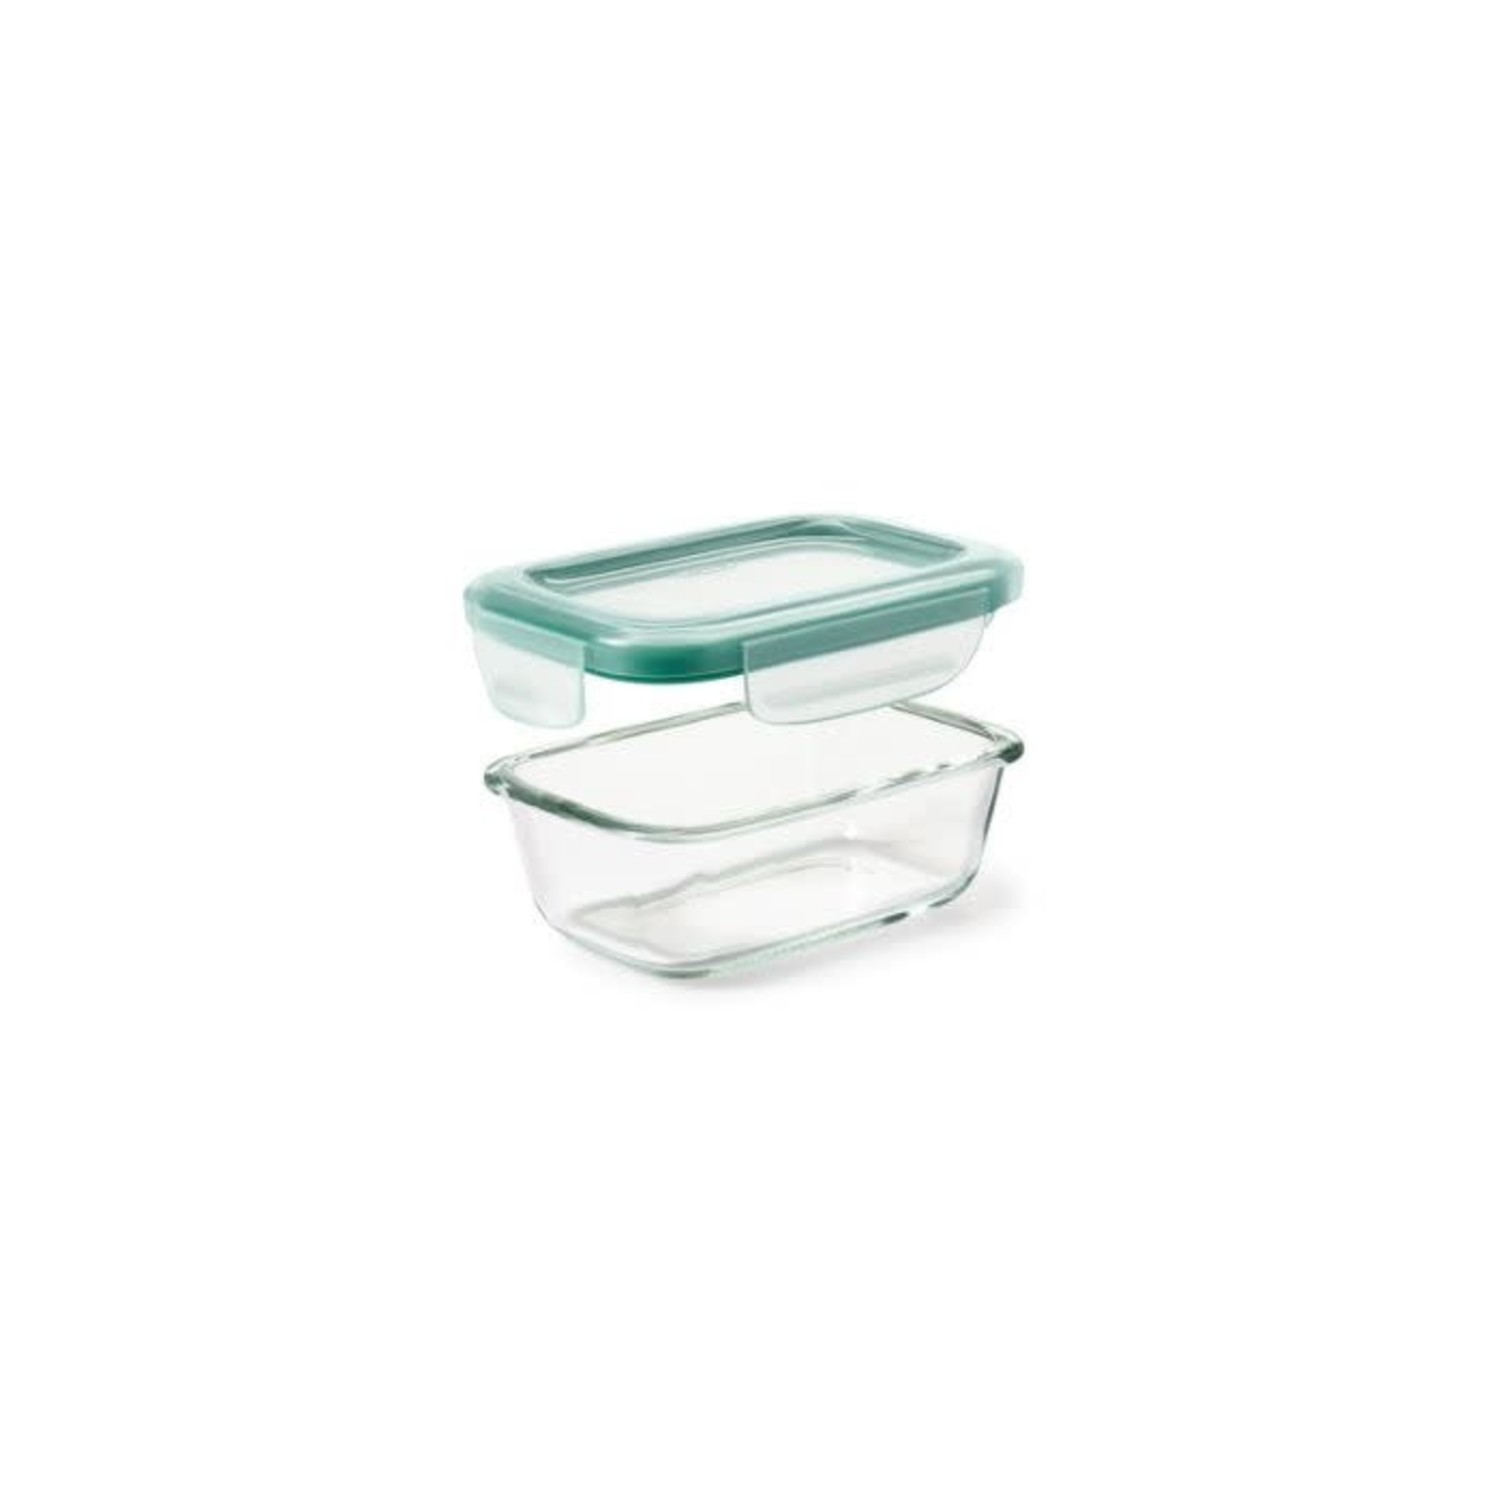 OXO OXO 8 cup Rectangular Glass Storage Container